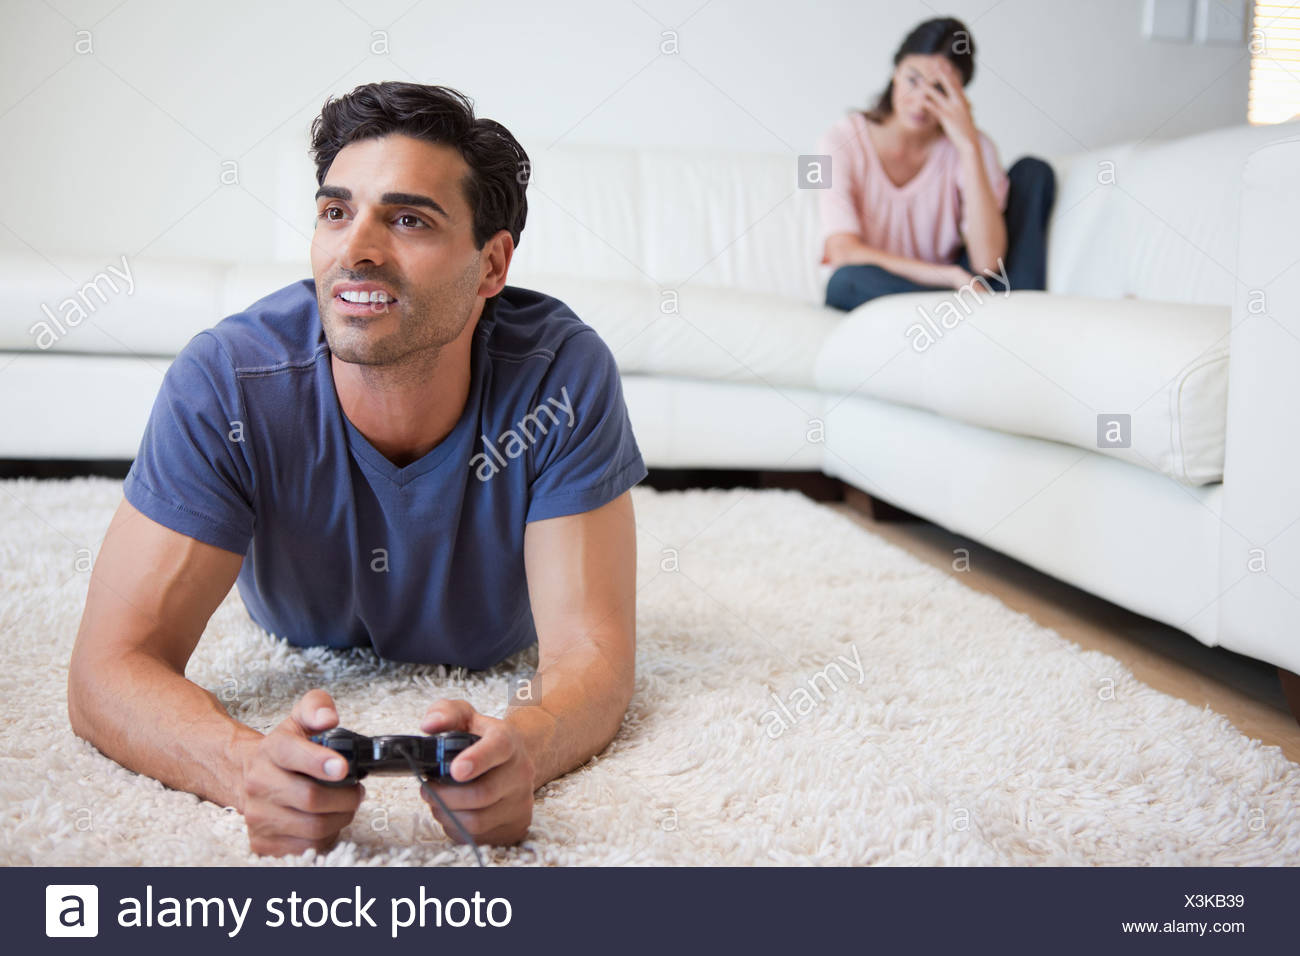 video games for girlfriend